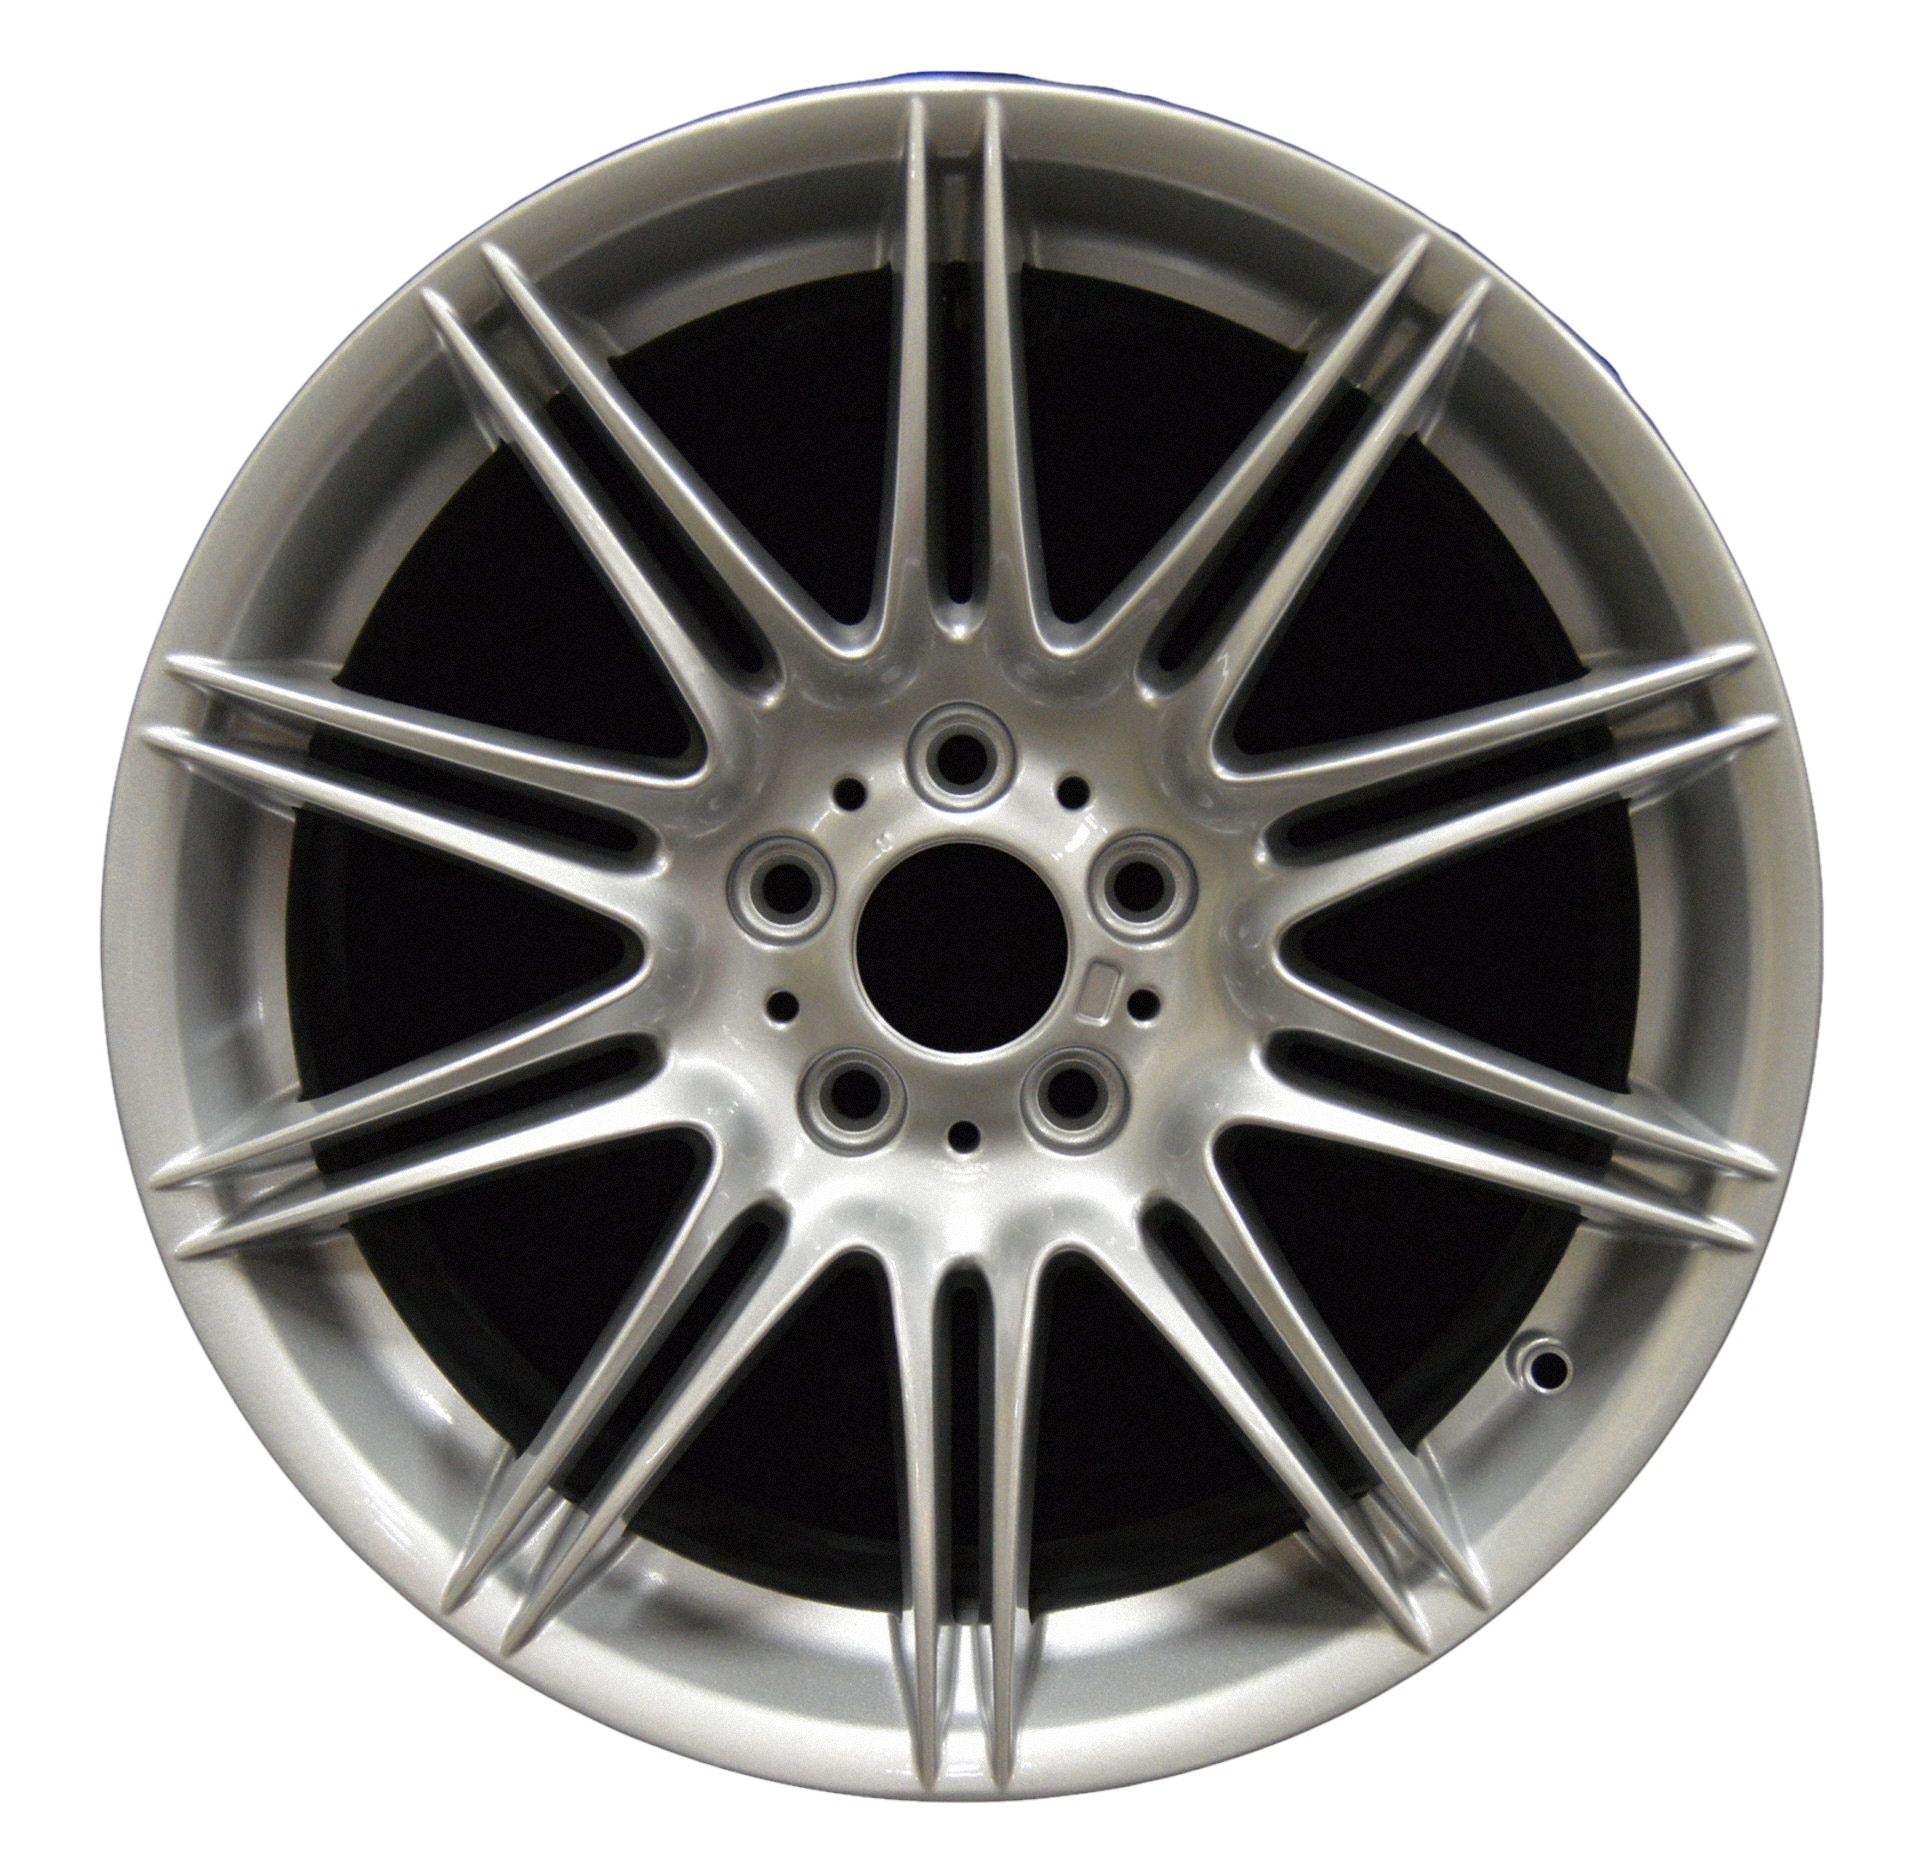 BMW 535i  2008, 2009, 2010 Factory OEM Car Wheel Size 19x8.5 Alloy WAO.71302FT.PS10.FF